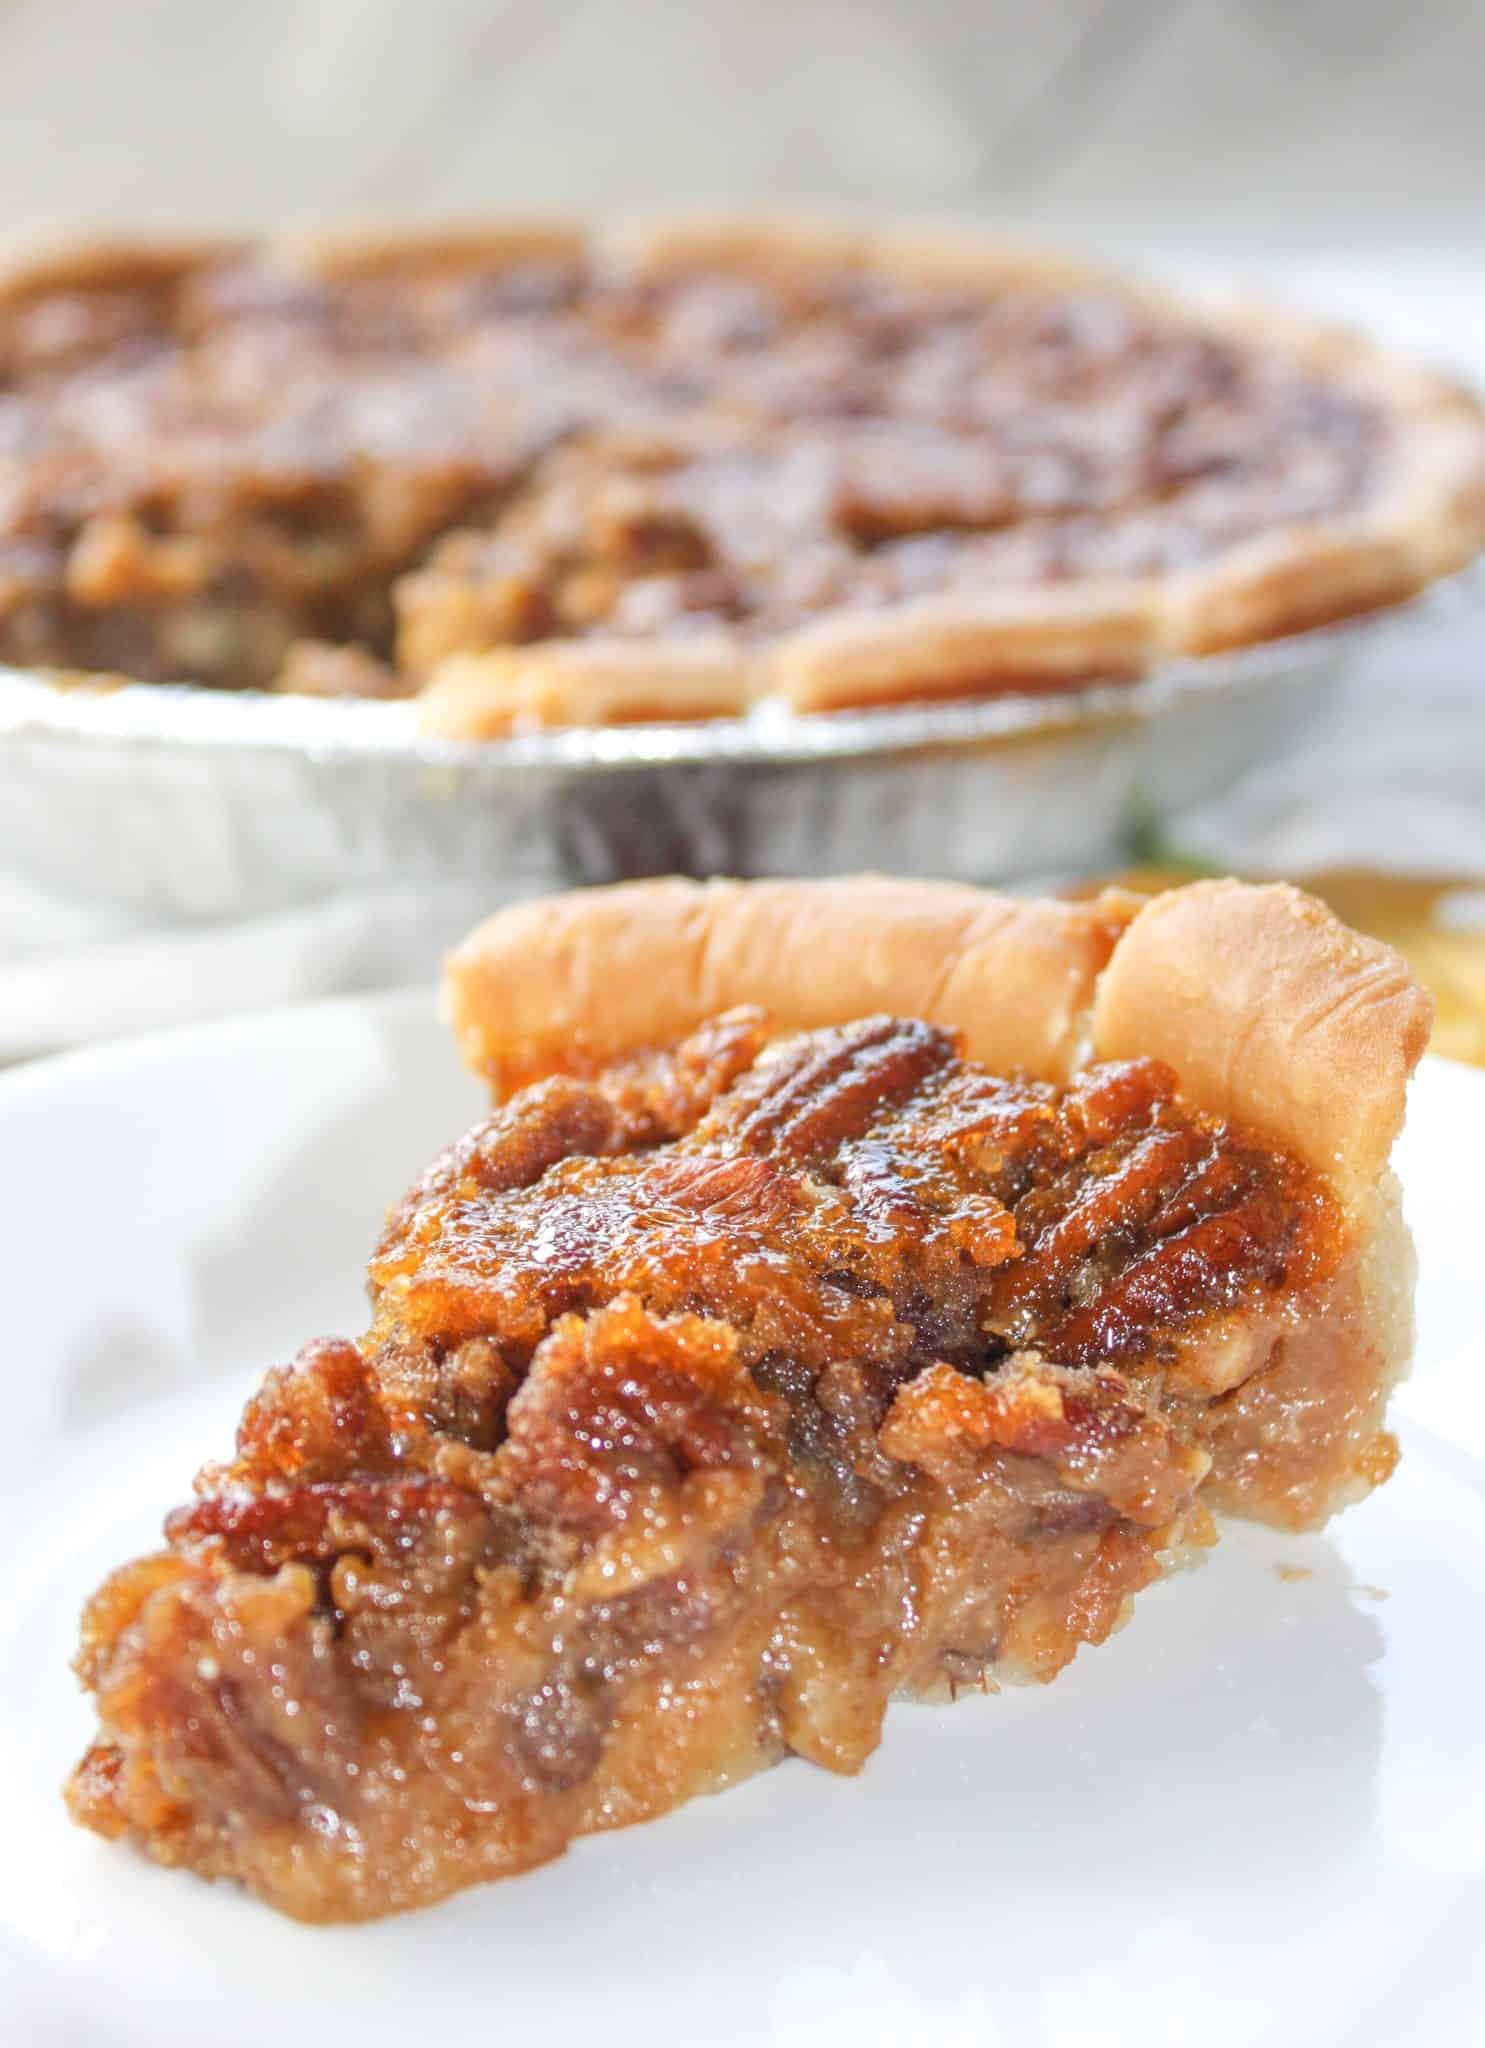 Pumpkin Pecan Pie is a seasonal twist on a traditional pie.  This gluten free dessert will make a wonderful addition to any Thanksgiving menu or treat your family to this flavourful treat any time of the year!